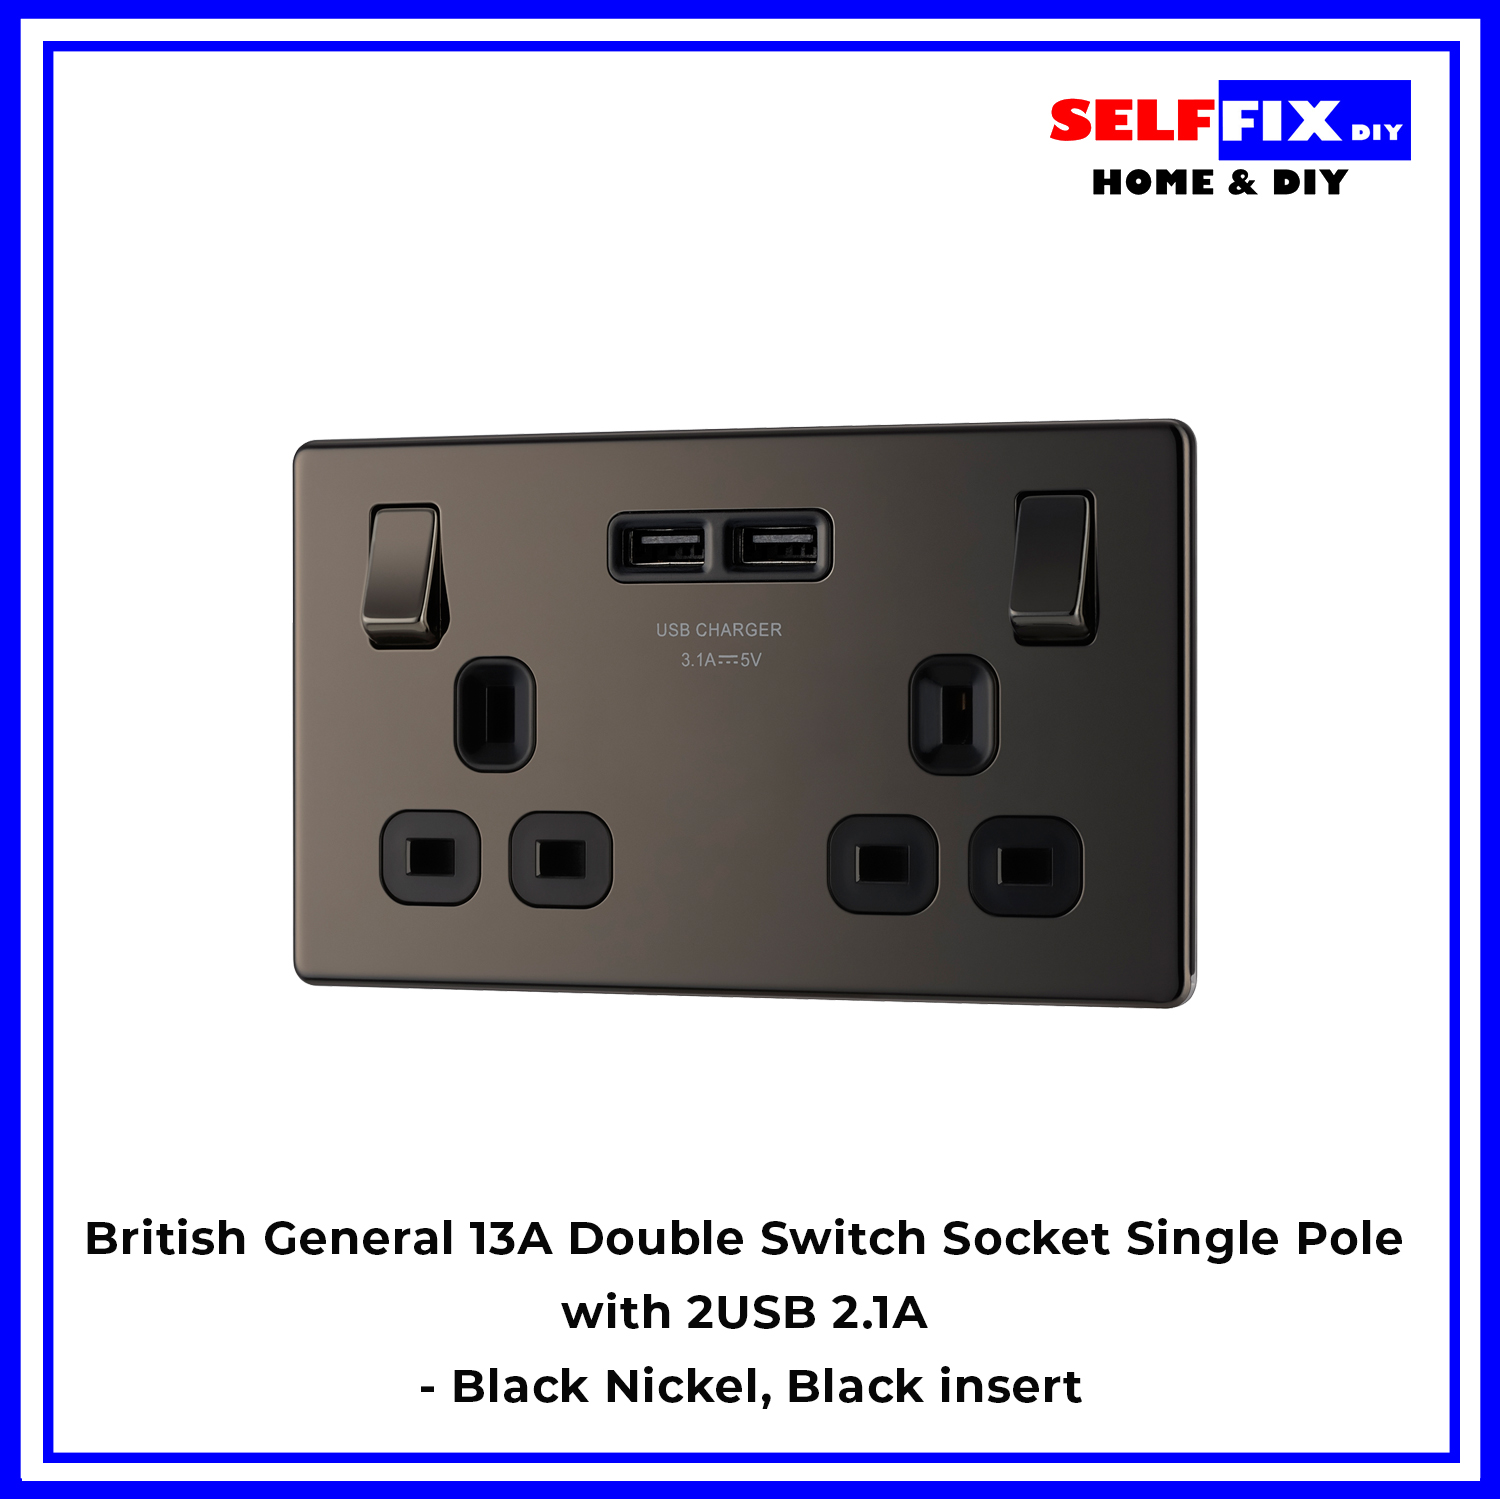 NEW 13AMP ROSE GOLD/BLACK NICKEL SOCKETS 2 SWITCH 2USB 2 GANG POWER ELECTRIC 